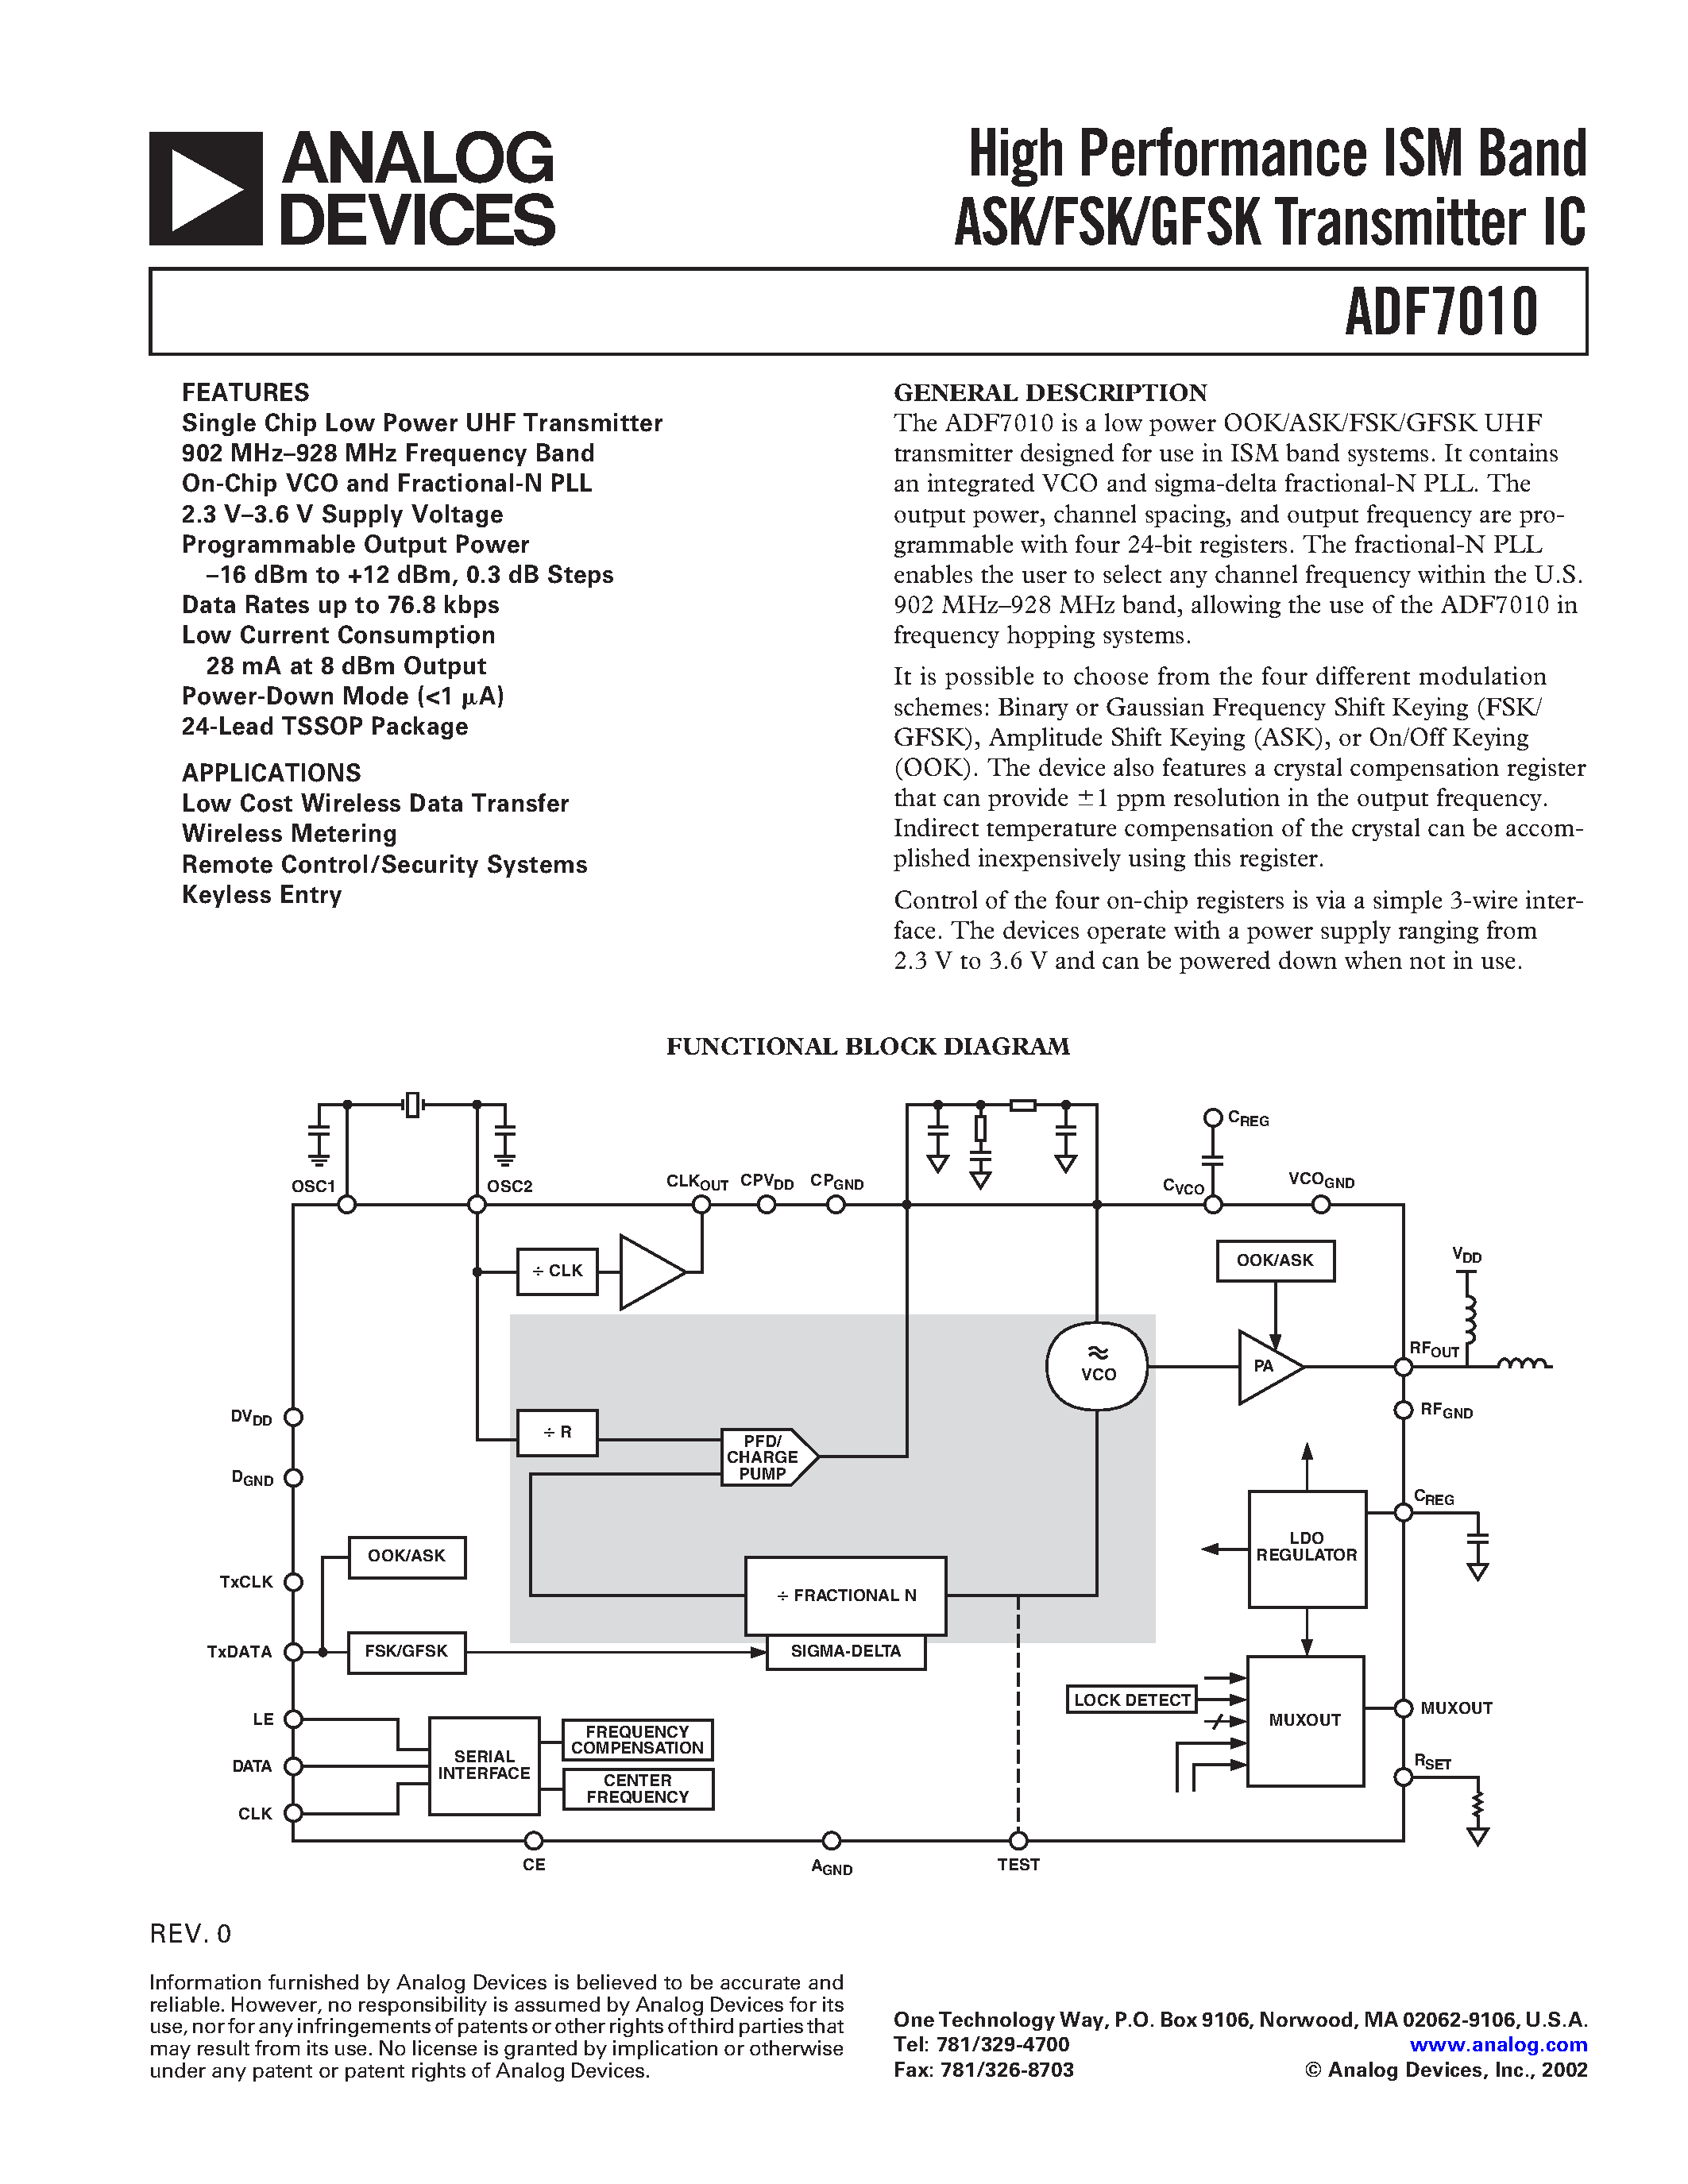 Datasheet ADF7010BRU - High Performance ISM Band ASK/FSK/GFSK Transmitter IC page 1